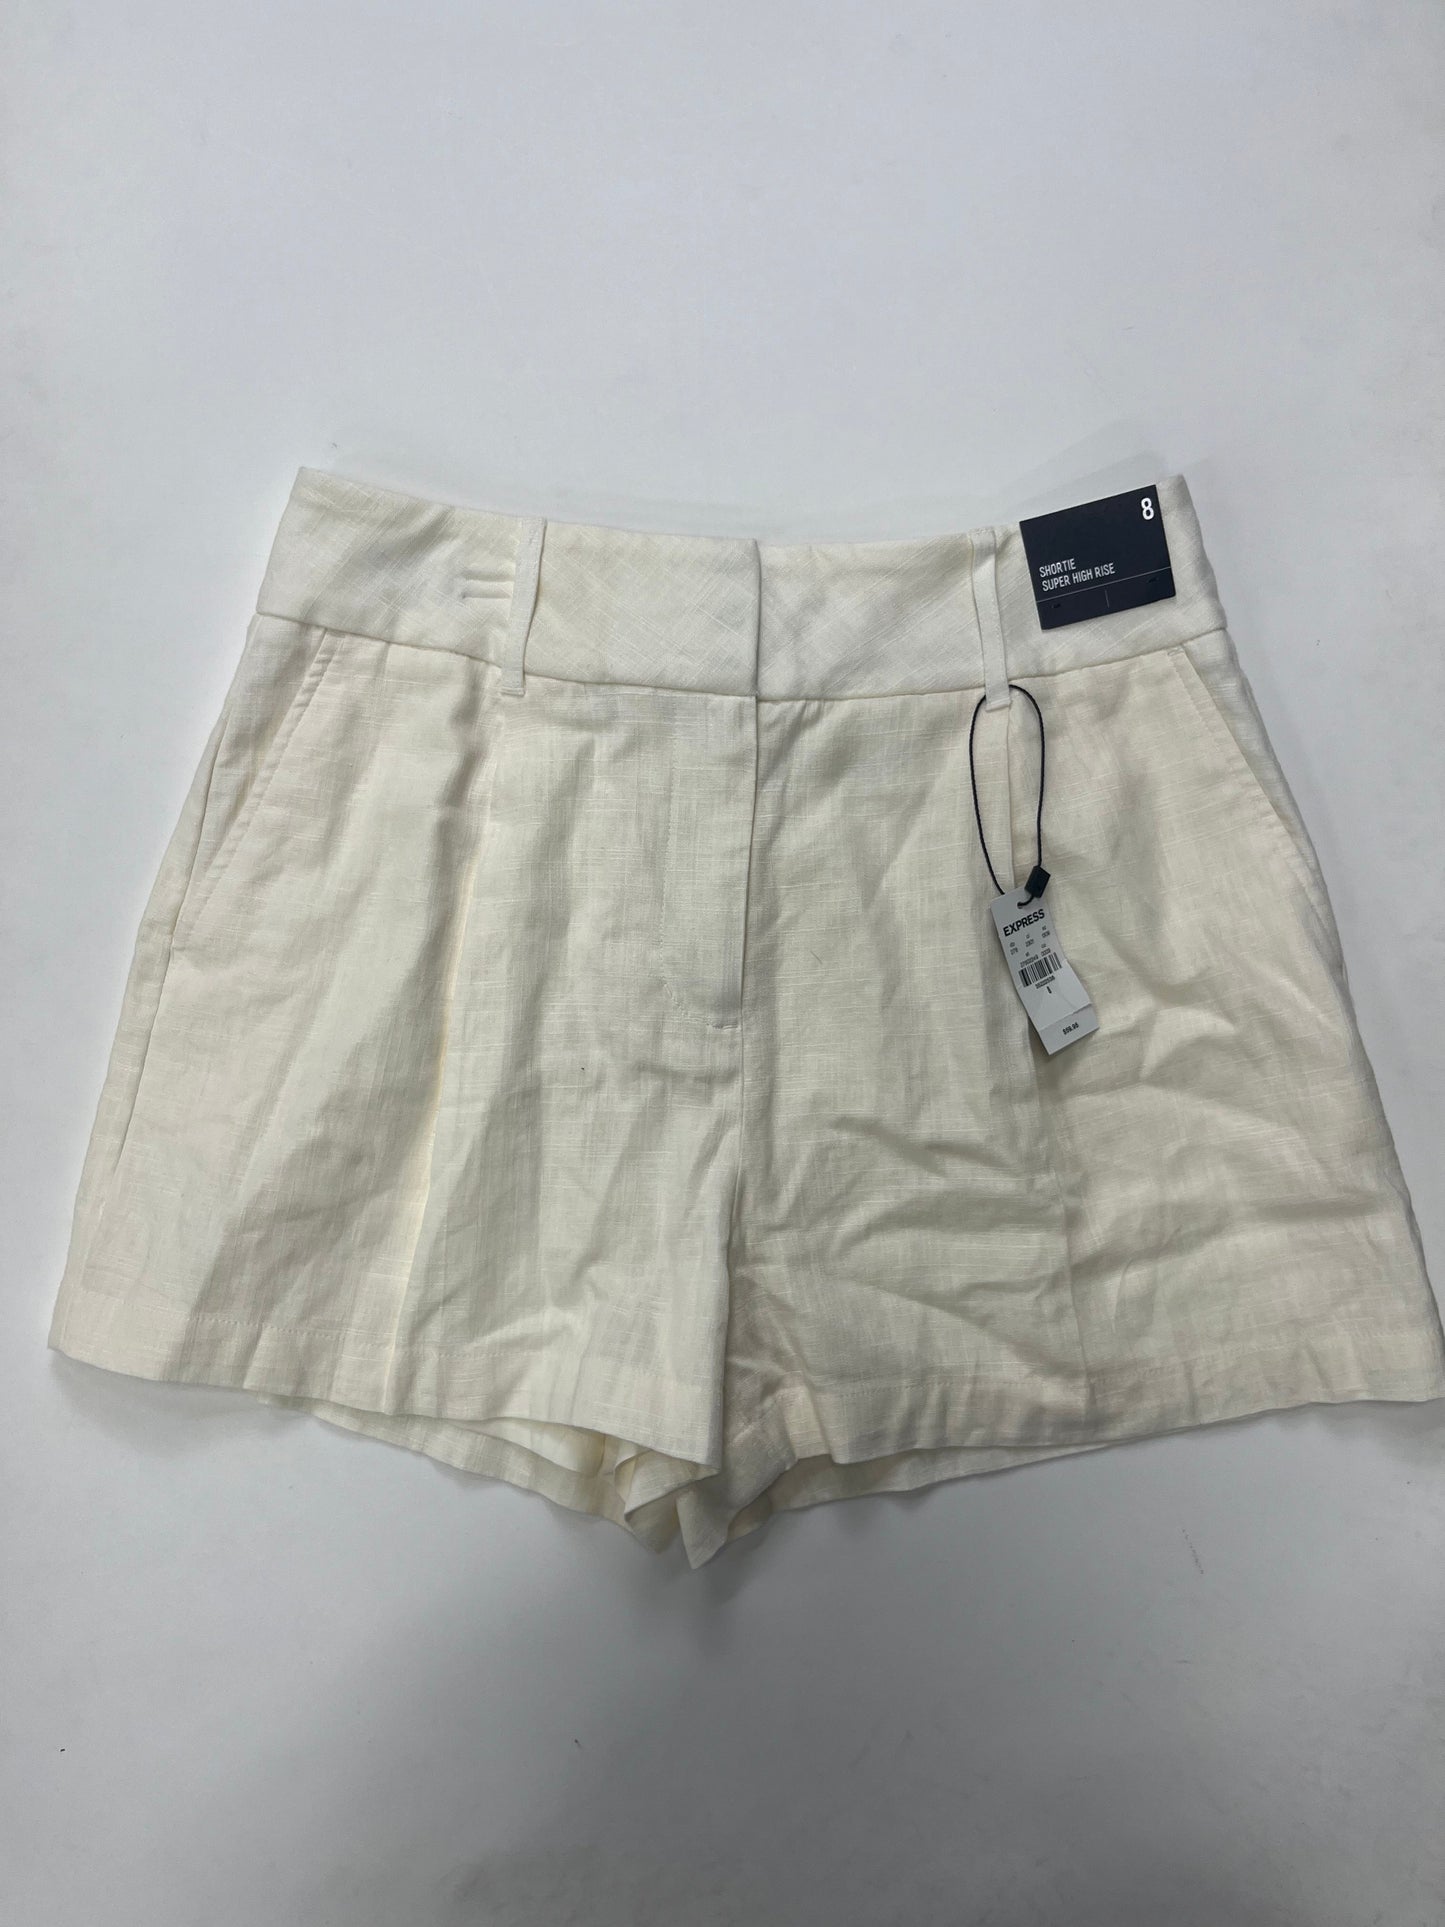 Shorts By Express NWT Size: 8